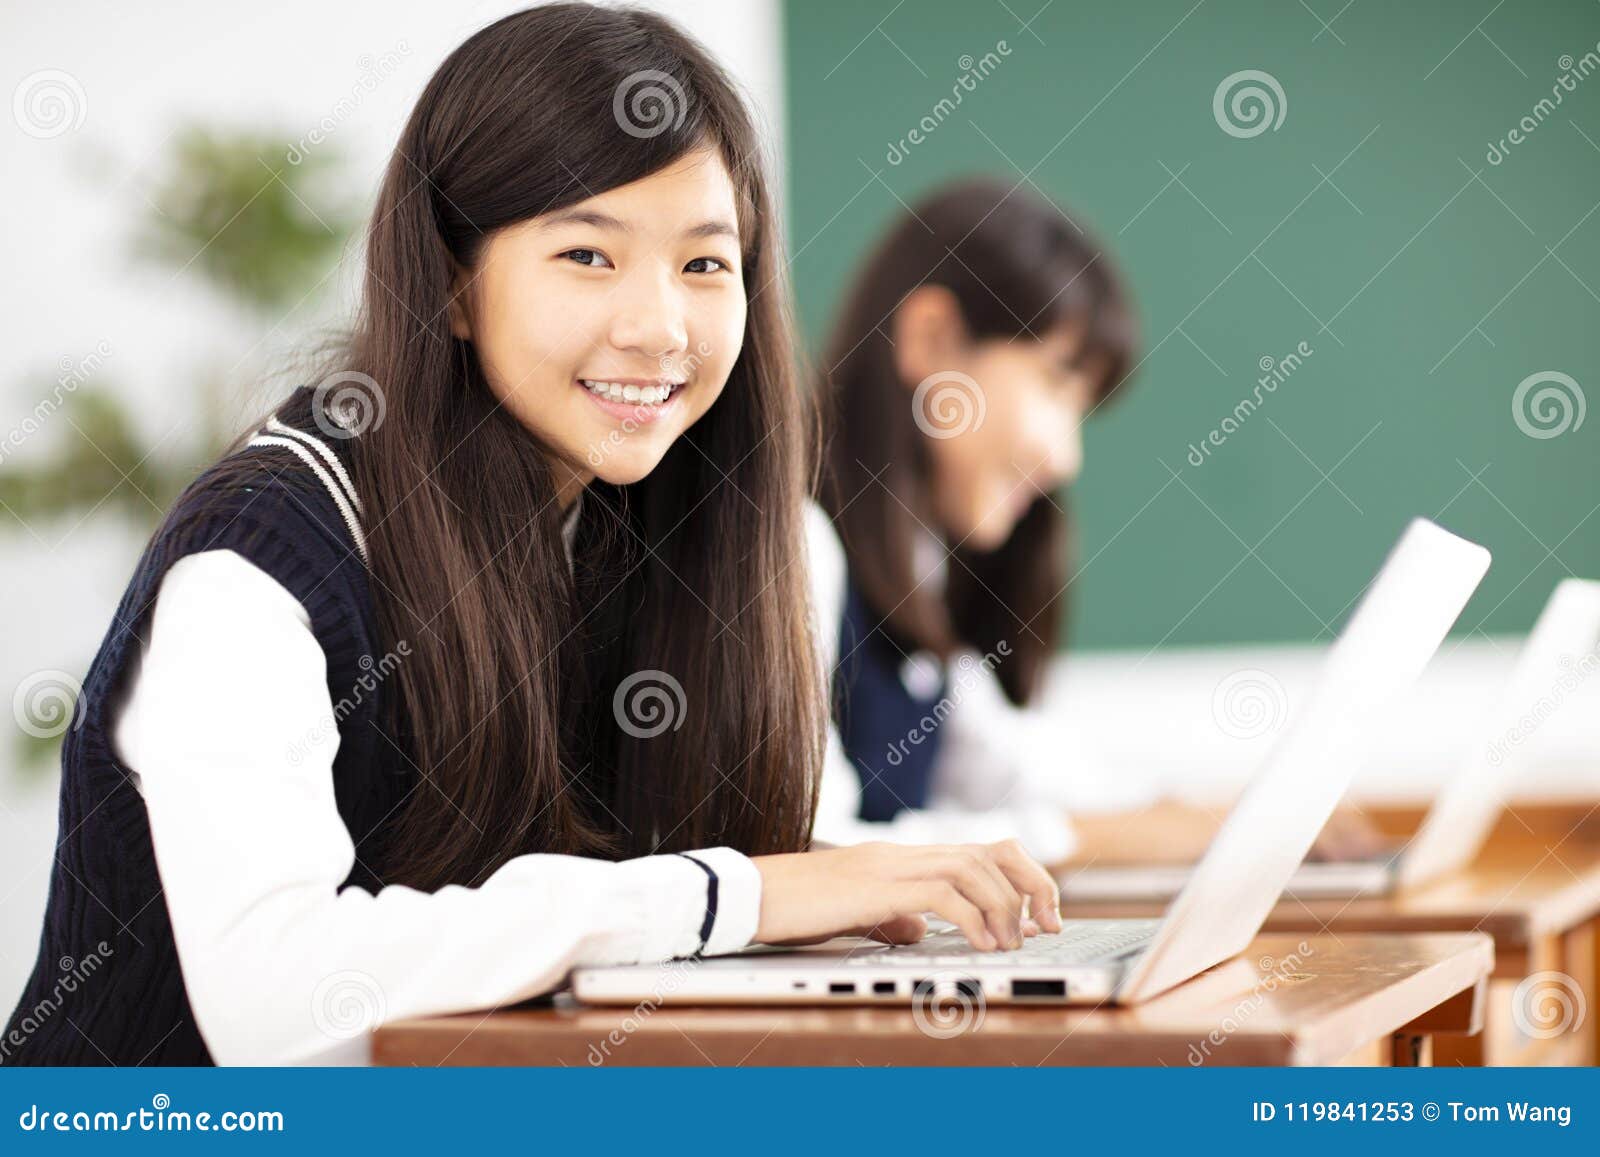 teenager student learning online with laptop in classroom